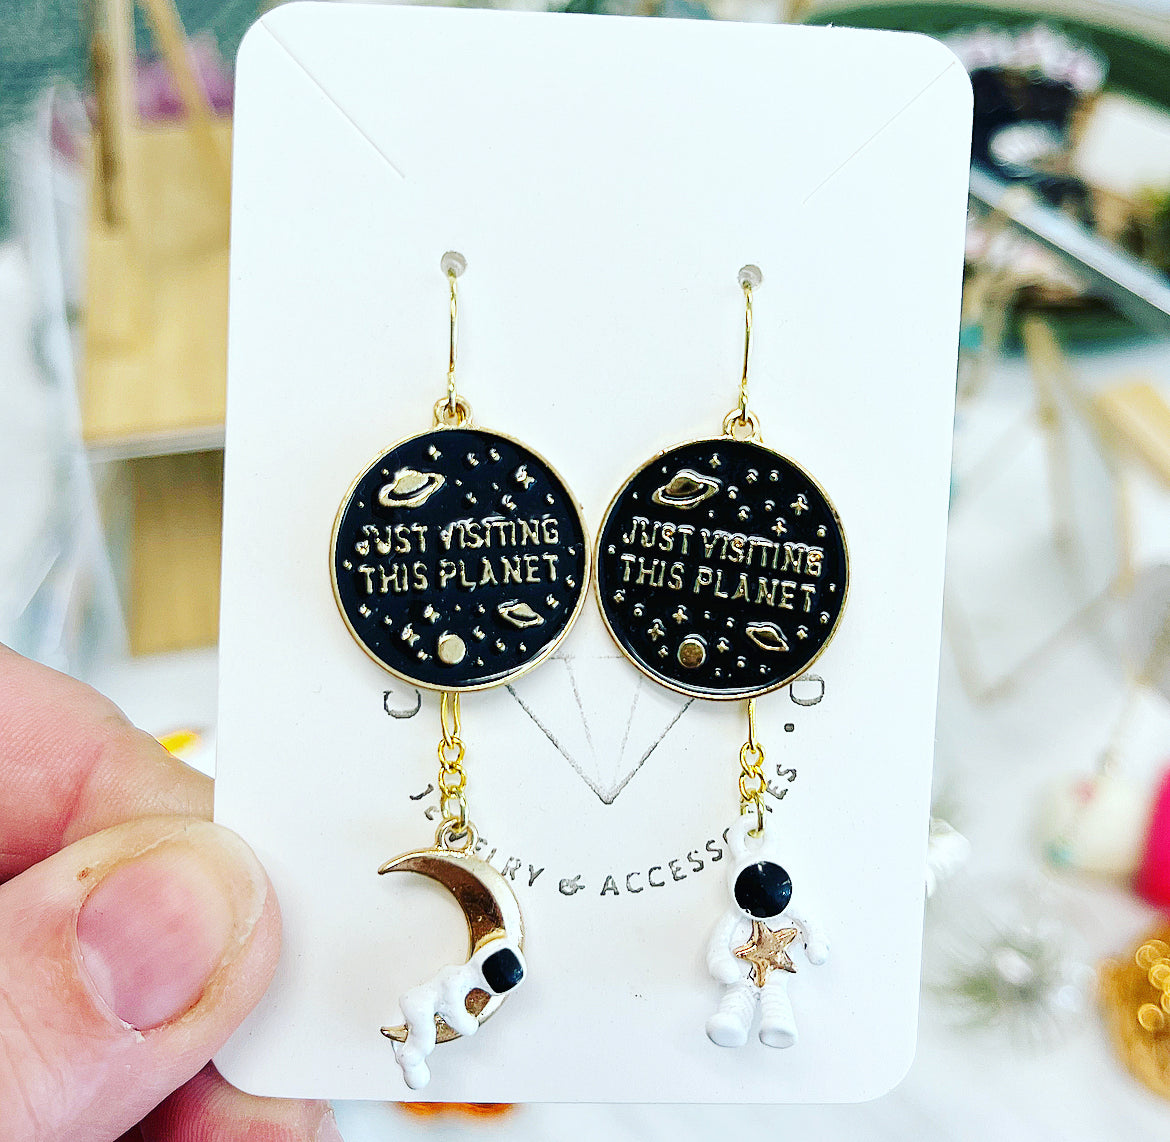 Just Visiting This Planet Earrings